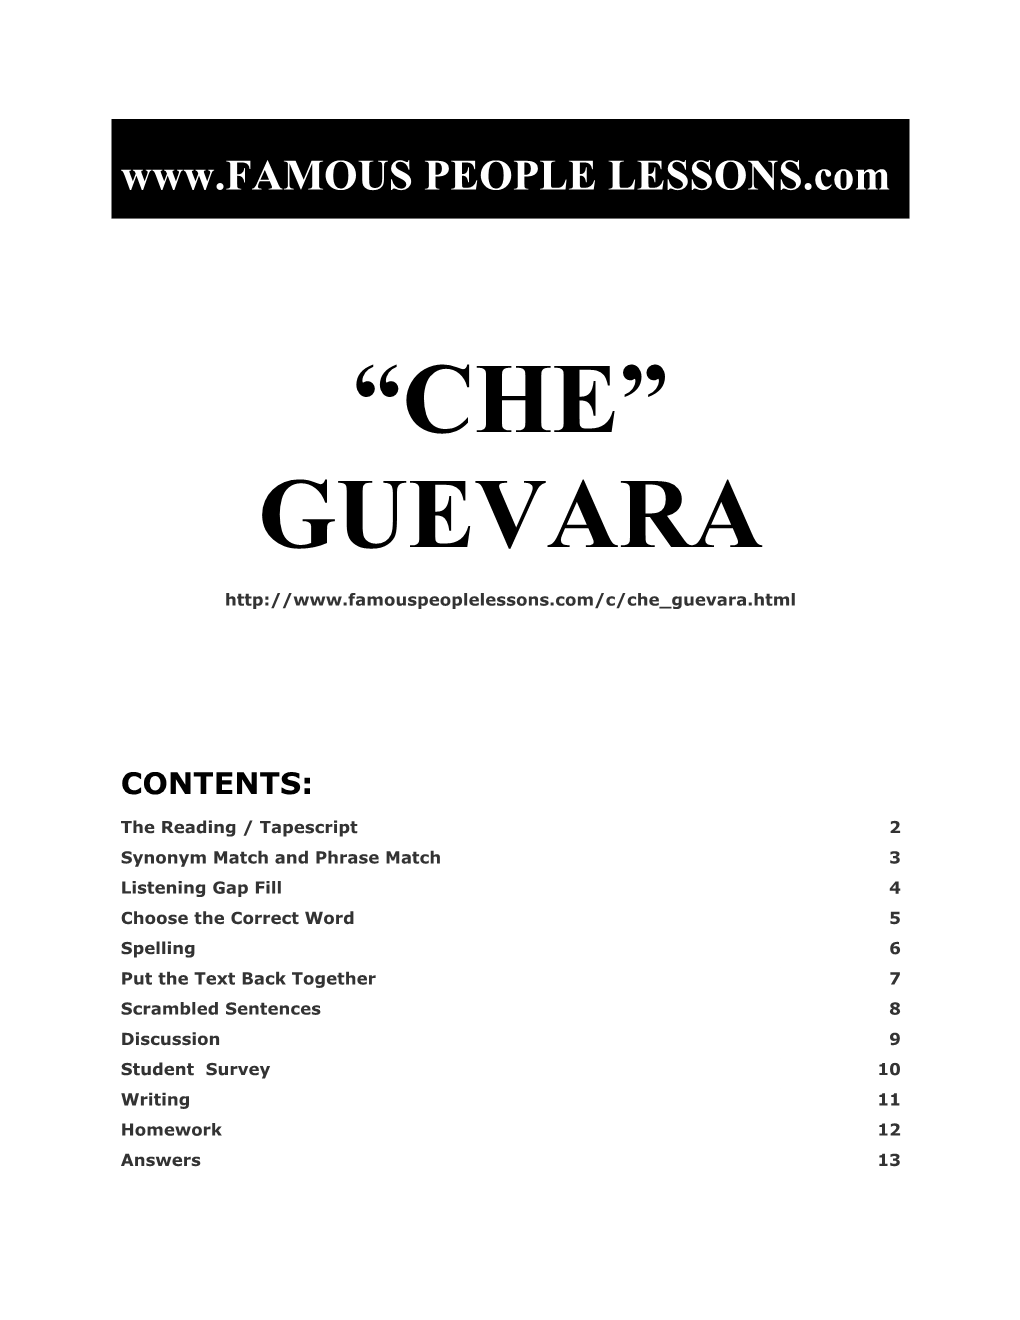 Famous People Lessons - Ernesto Che Guevara